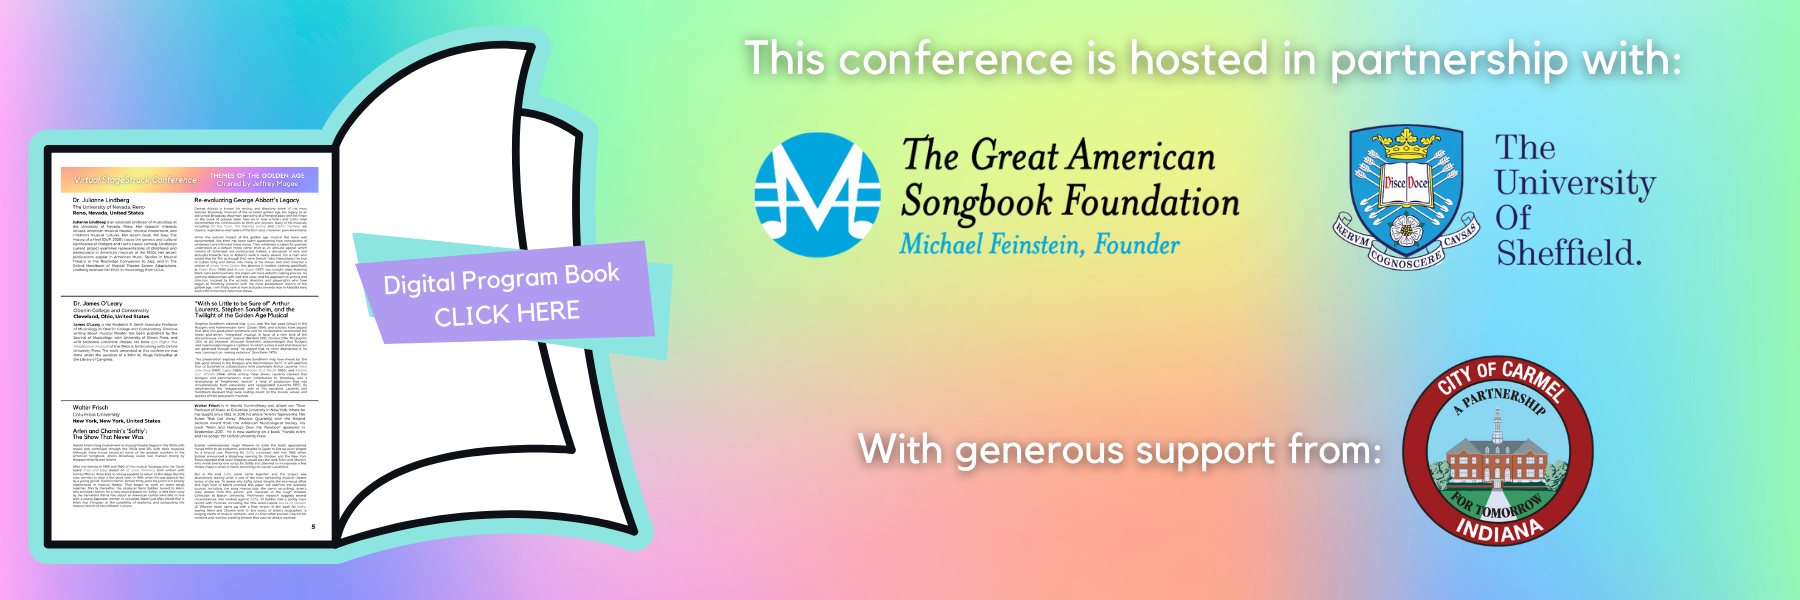 Digital Program Book - Click Here. This conference is hosted in partnership with the Great American Songbook Foundation and The University of Sheffield with generous support from the City of Carmel.